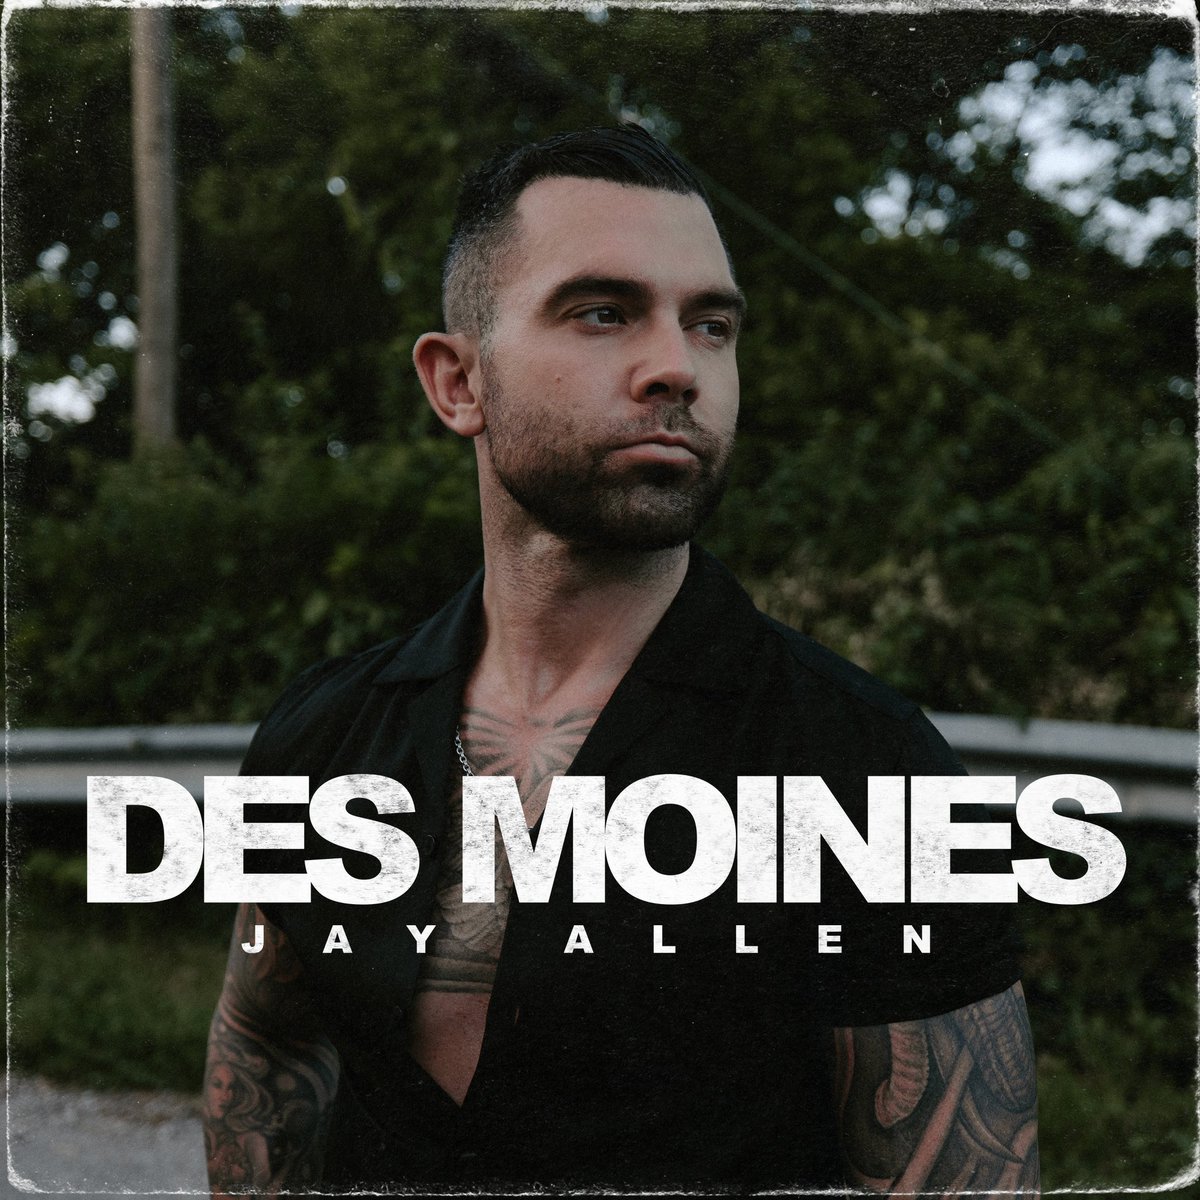 I’M DROPPING AN ALBUM!!! “Des Moines” comes out June 28th(on my momma’s birthday), and I can’t wait for y’all to hear these 10 works of art I’ve poured my heart into. Pre-save available now onerpm.link/DesMoines… THANK YOU🙏🏼🙏🏼🙏🏼